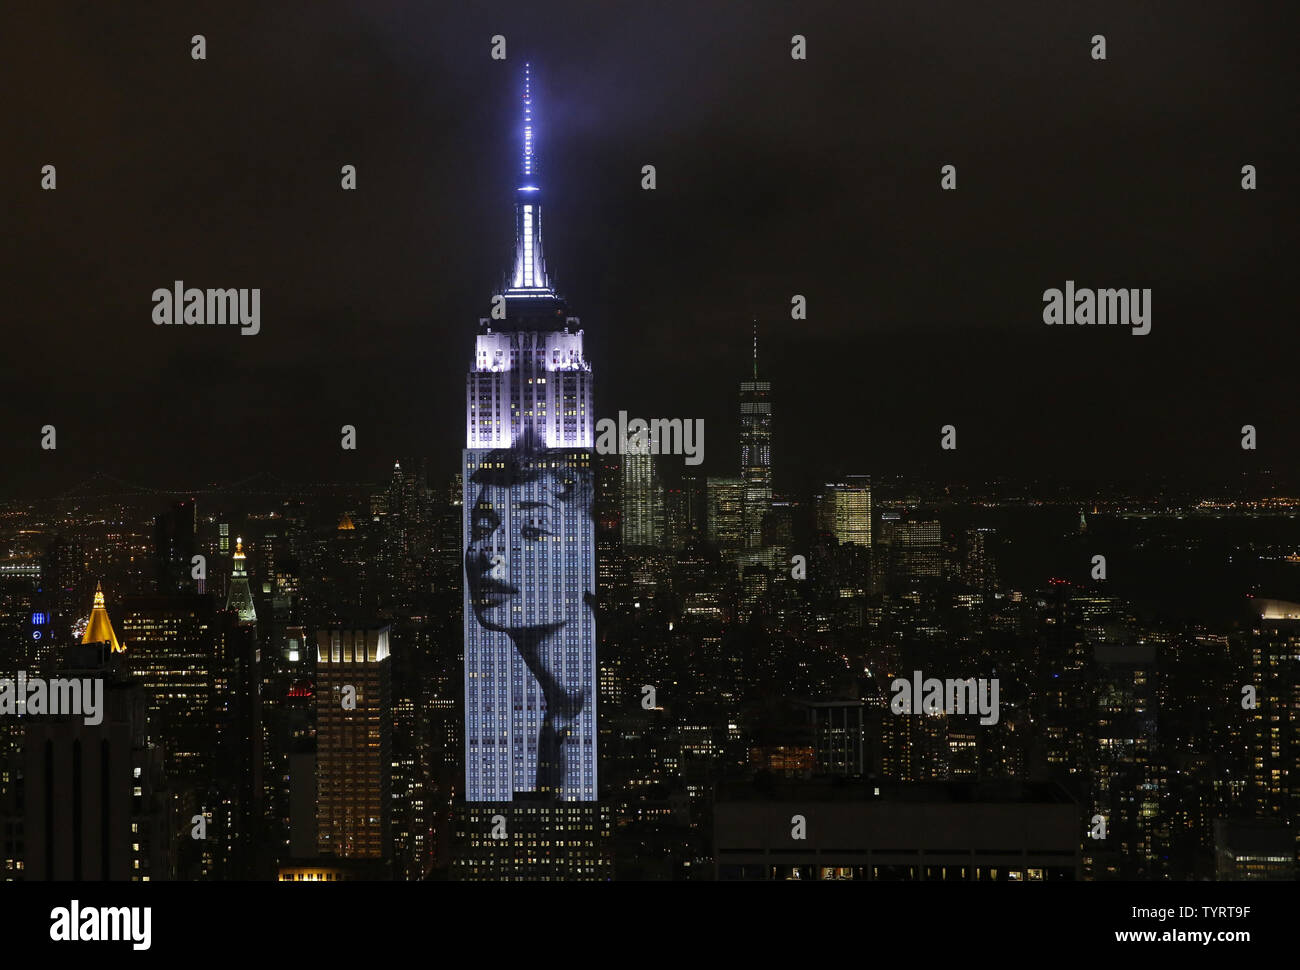 An artist rendering image of Audrey Hepburn is projected onto the Empire State Building in the Manhattan skyline to celebrate Harper BazaarÕs 150th anniversary on April 19, 2017 in New York City. Spanning 42 floors of the building and rising 500 feet high, the show featured iconic fashion images of everyone from Audrey Hepburn to Kate Moss, including iconic works by the likes of Andy Warhol.     Photo by John Angelillo/UPI Stock Photo